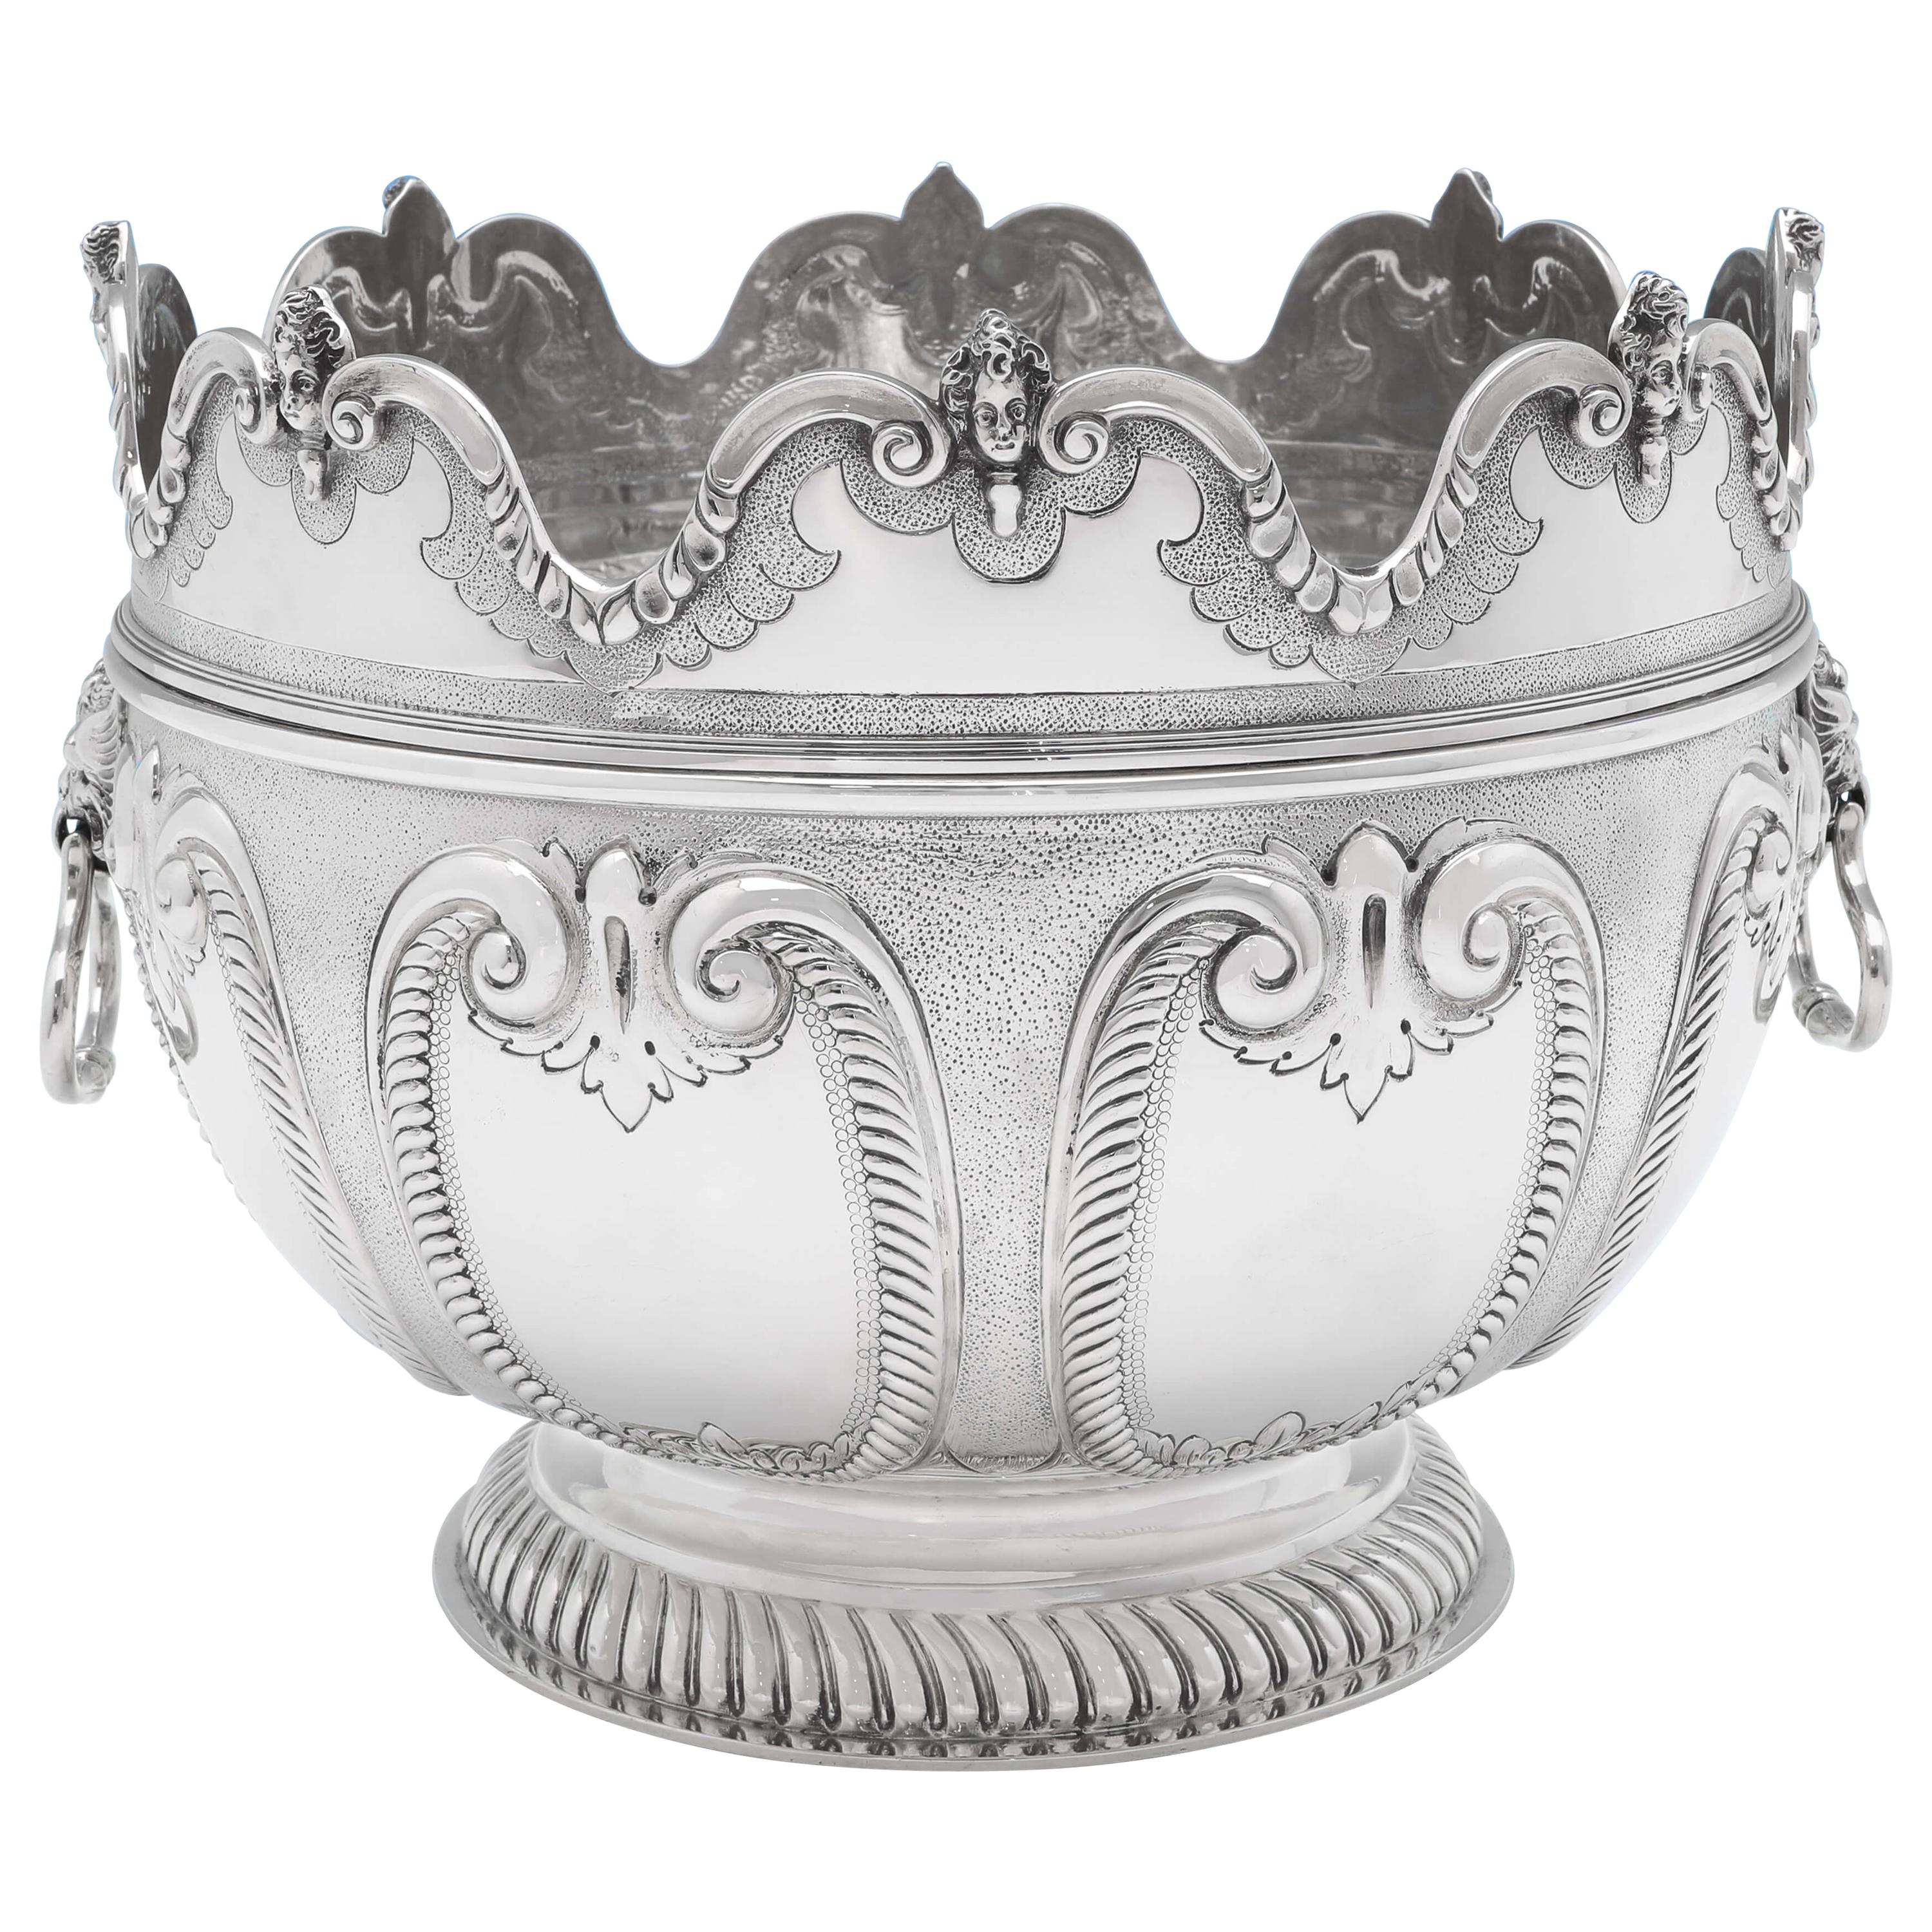 Victorian 'Monteith' Sterling Silver Bowl Hallmarked in 1890 with Removable Rim